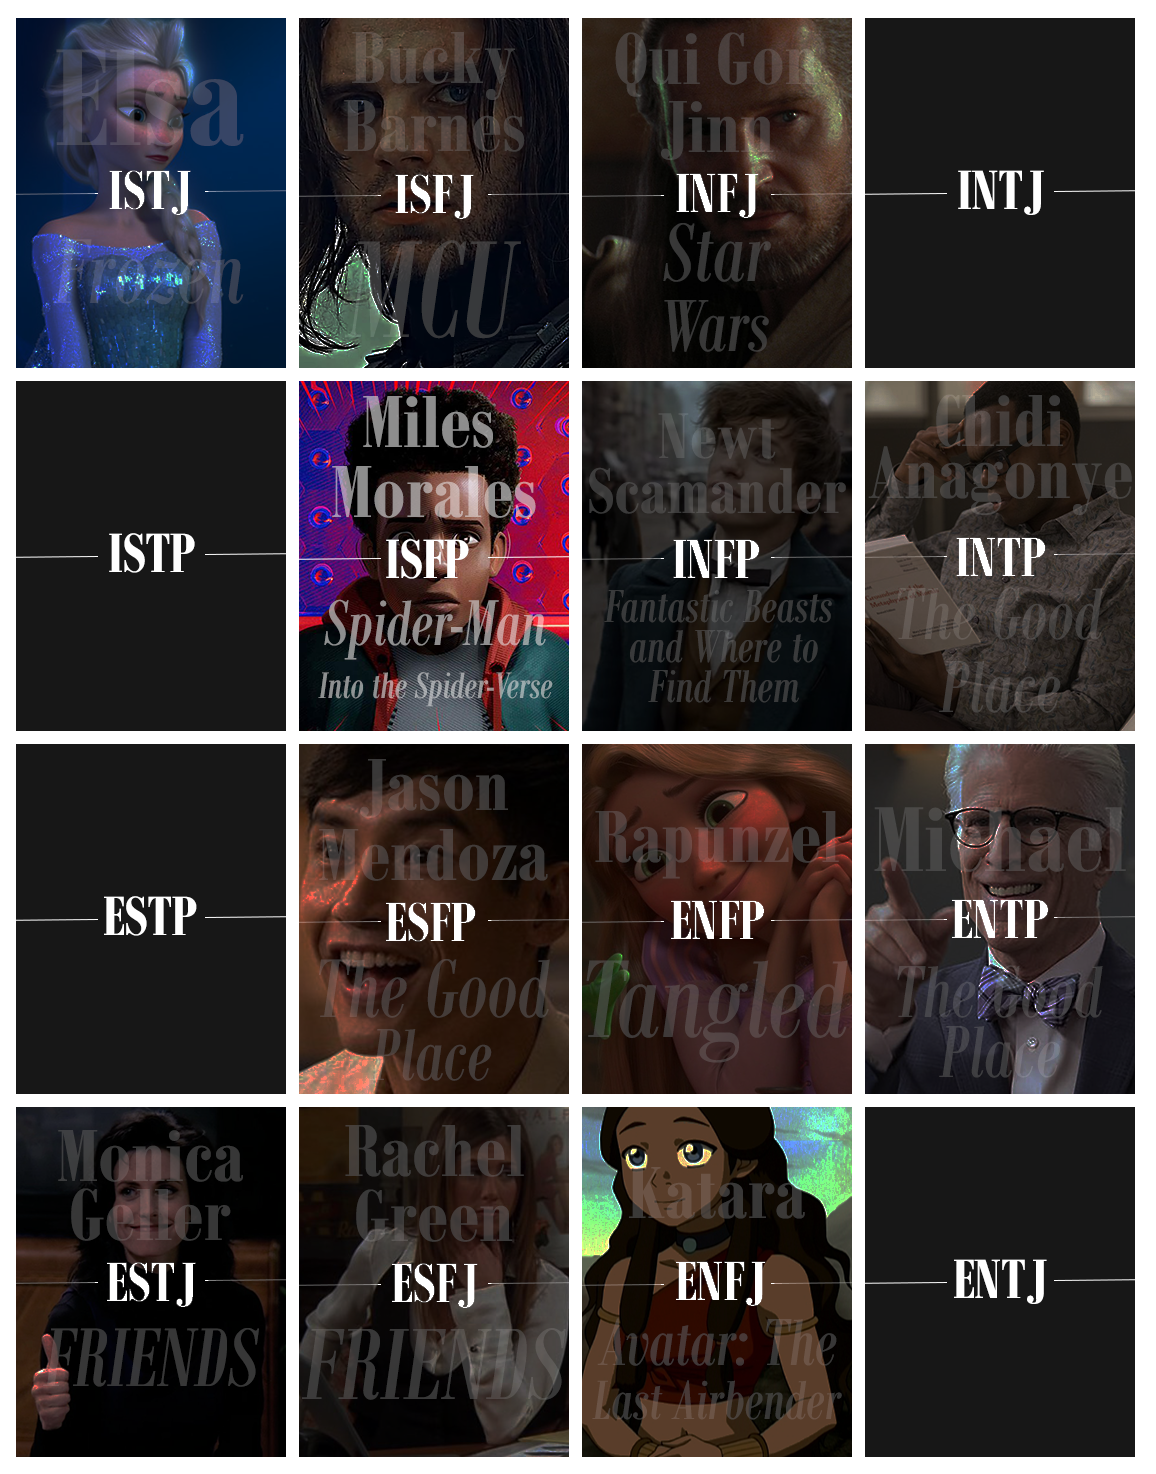 Guess what my MBTI is based off of my fictional characters : r